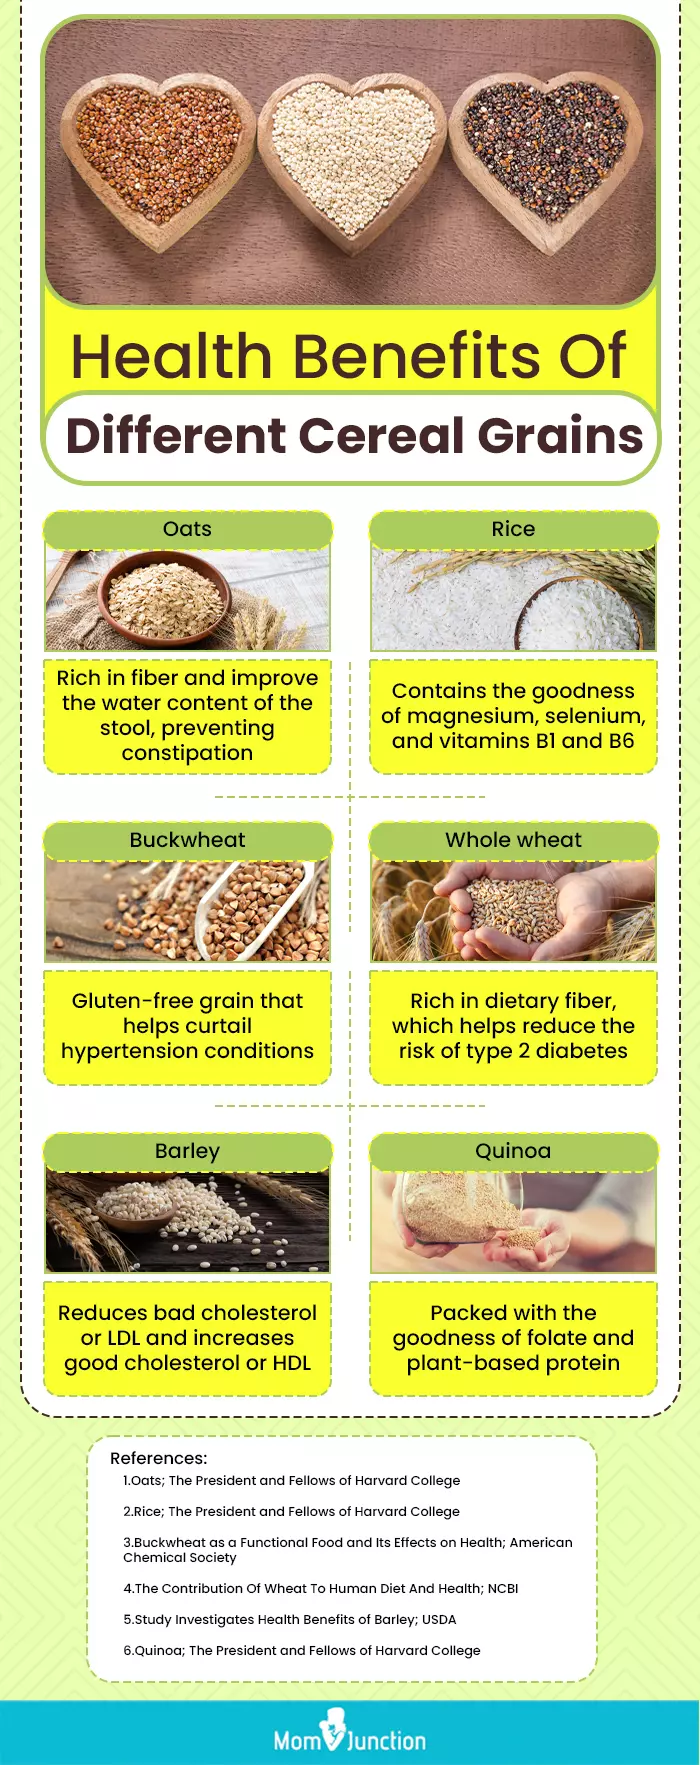 Health Benefits Of Different Cereal Grains (infographic)